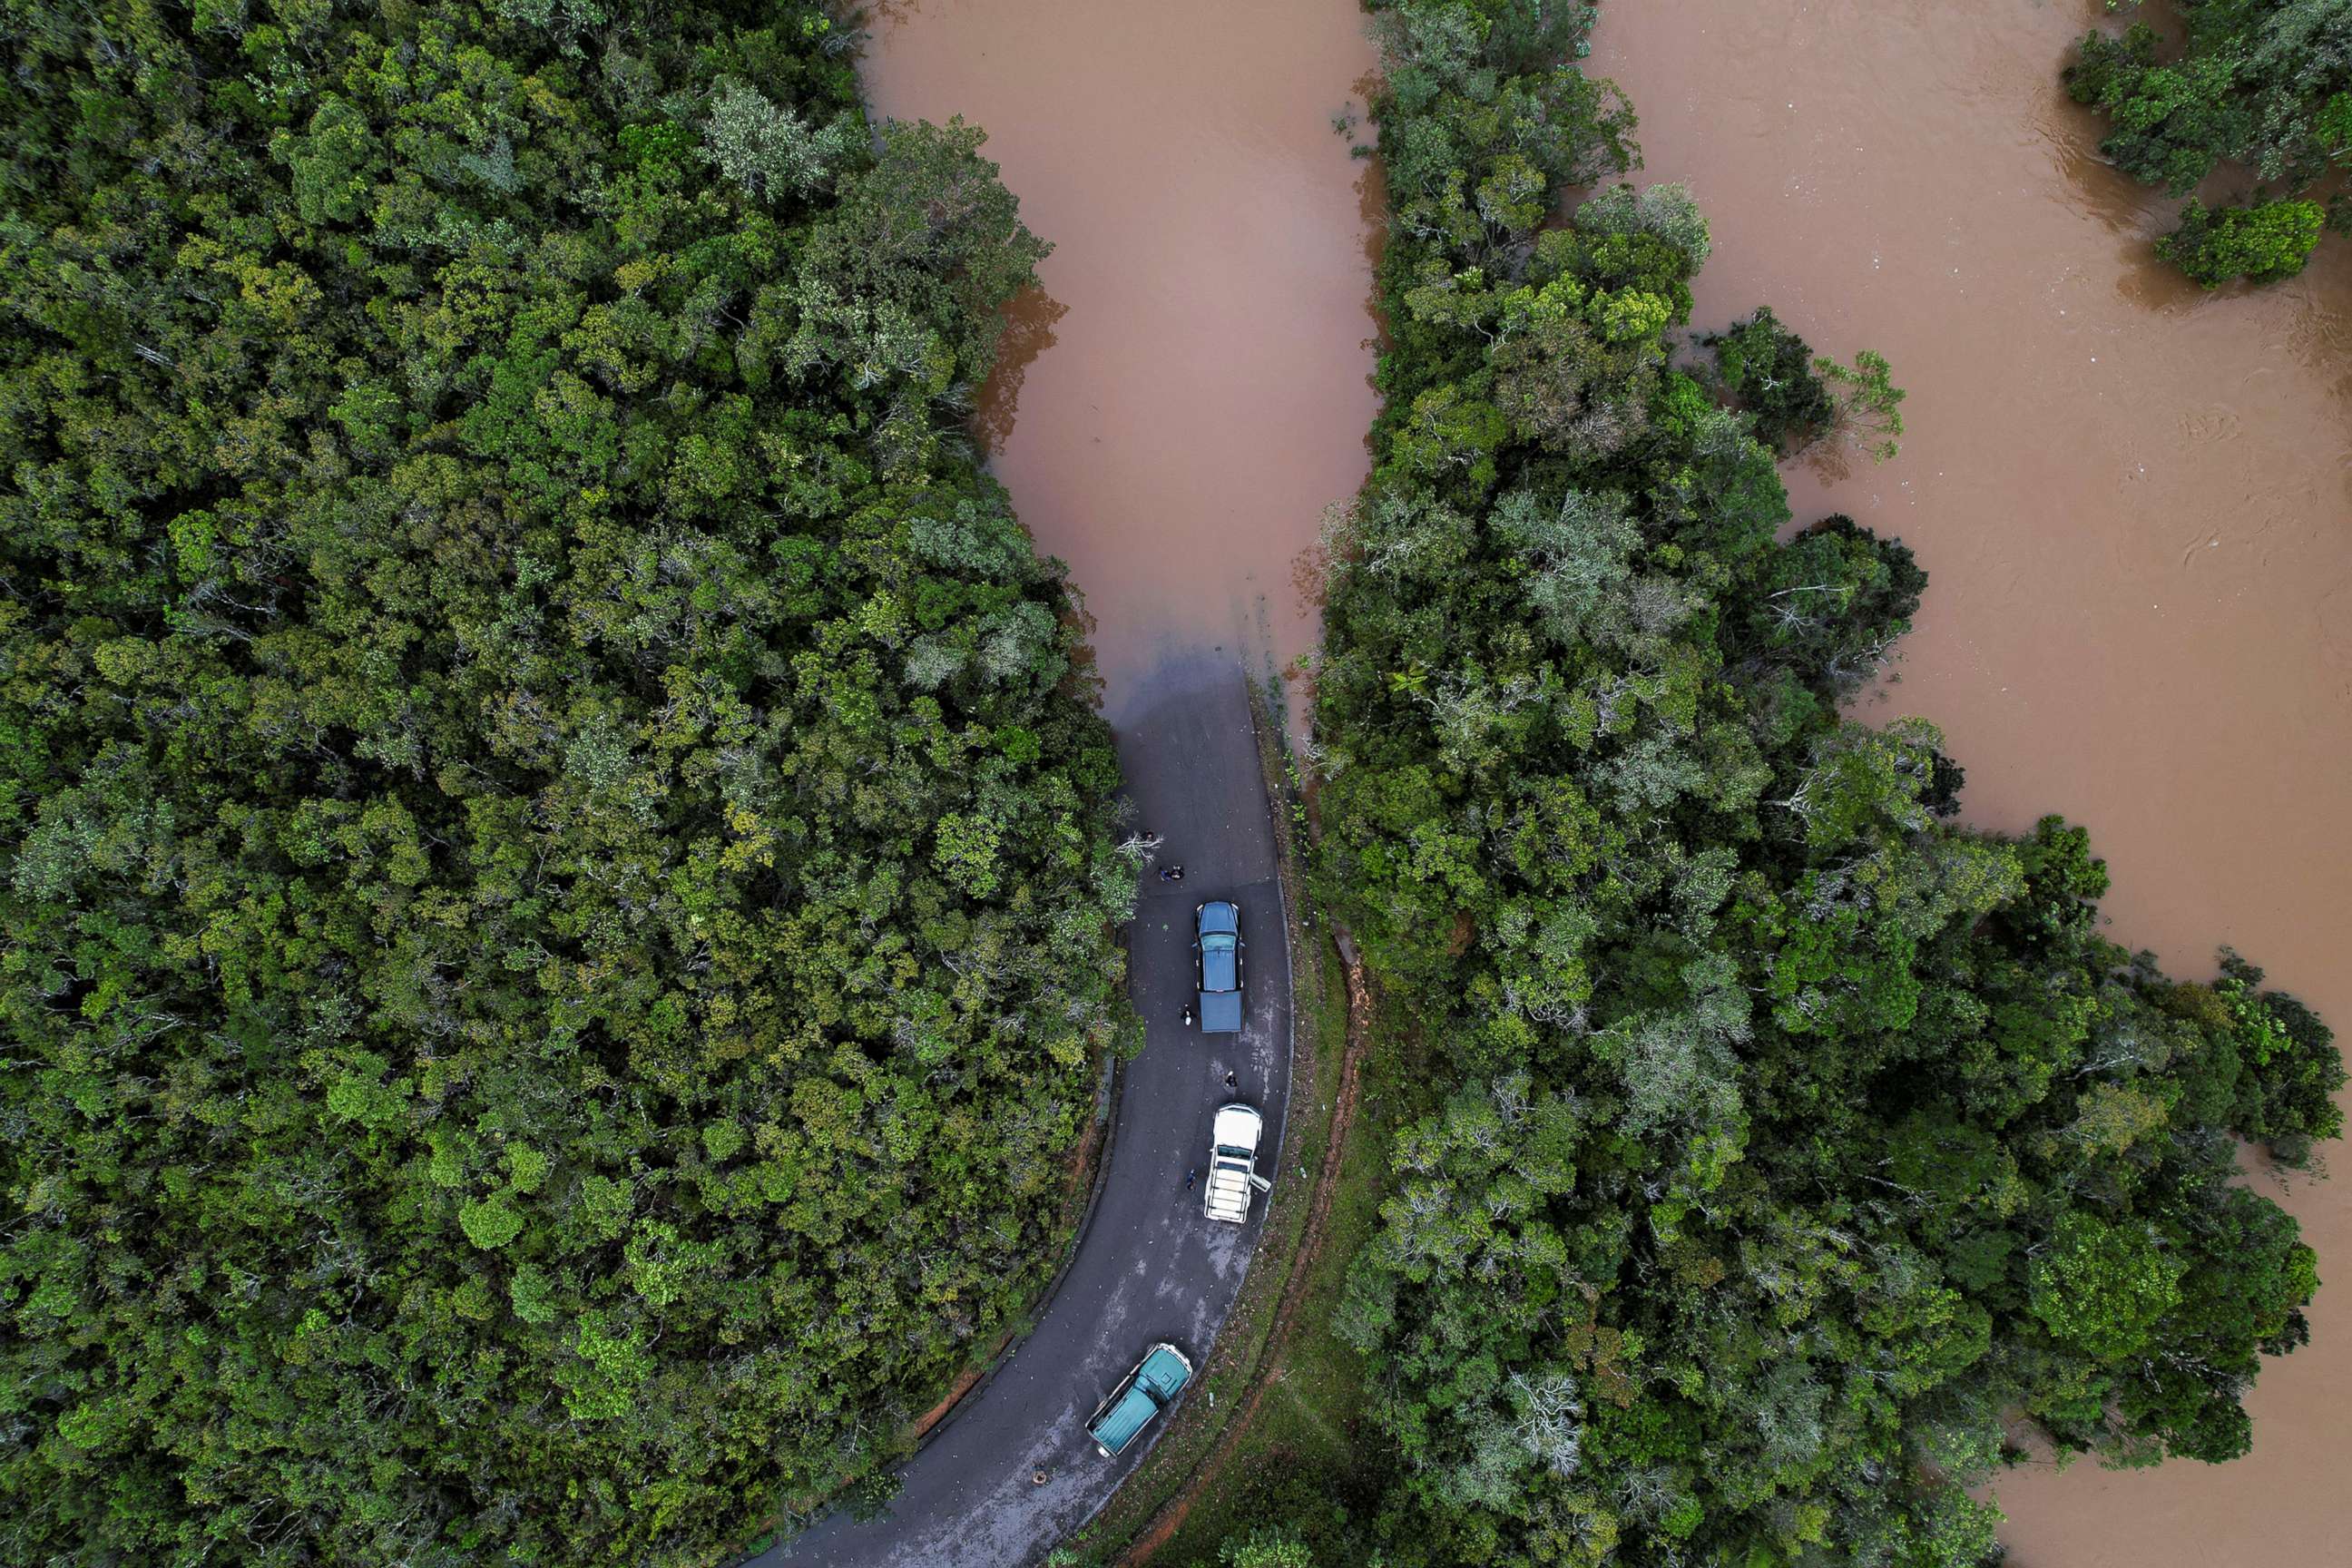 PHOTO: Cars stop before a flooded area, after Cyclone Batsirai made landfall, on a road in Vohiparara, Madagascar, Feb. 6, 2022.